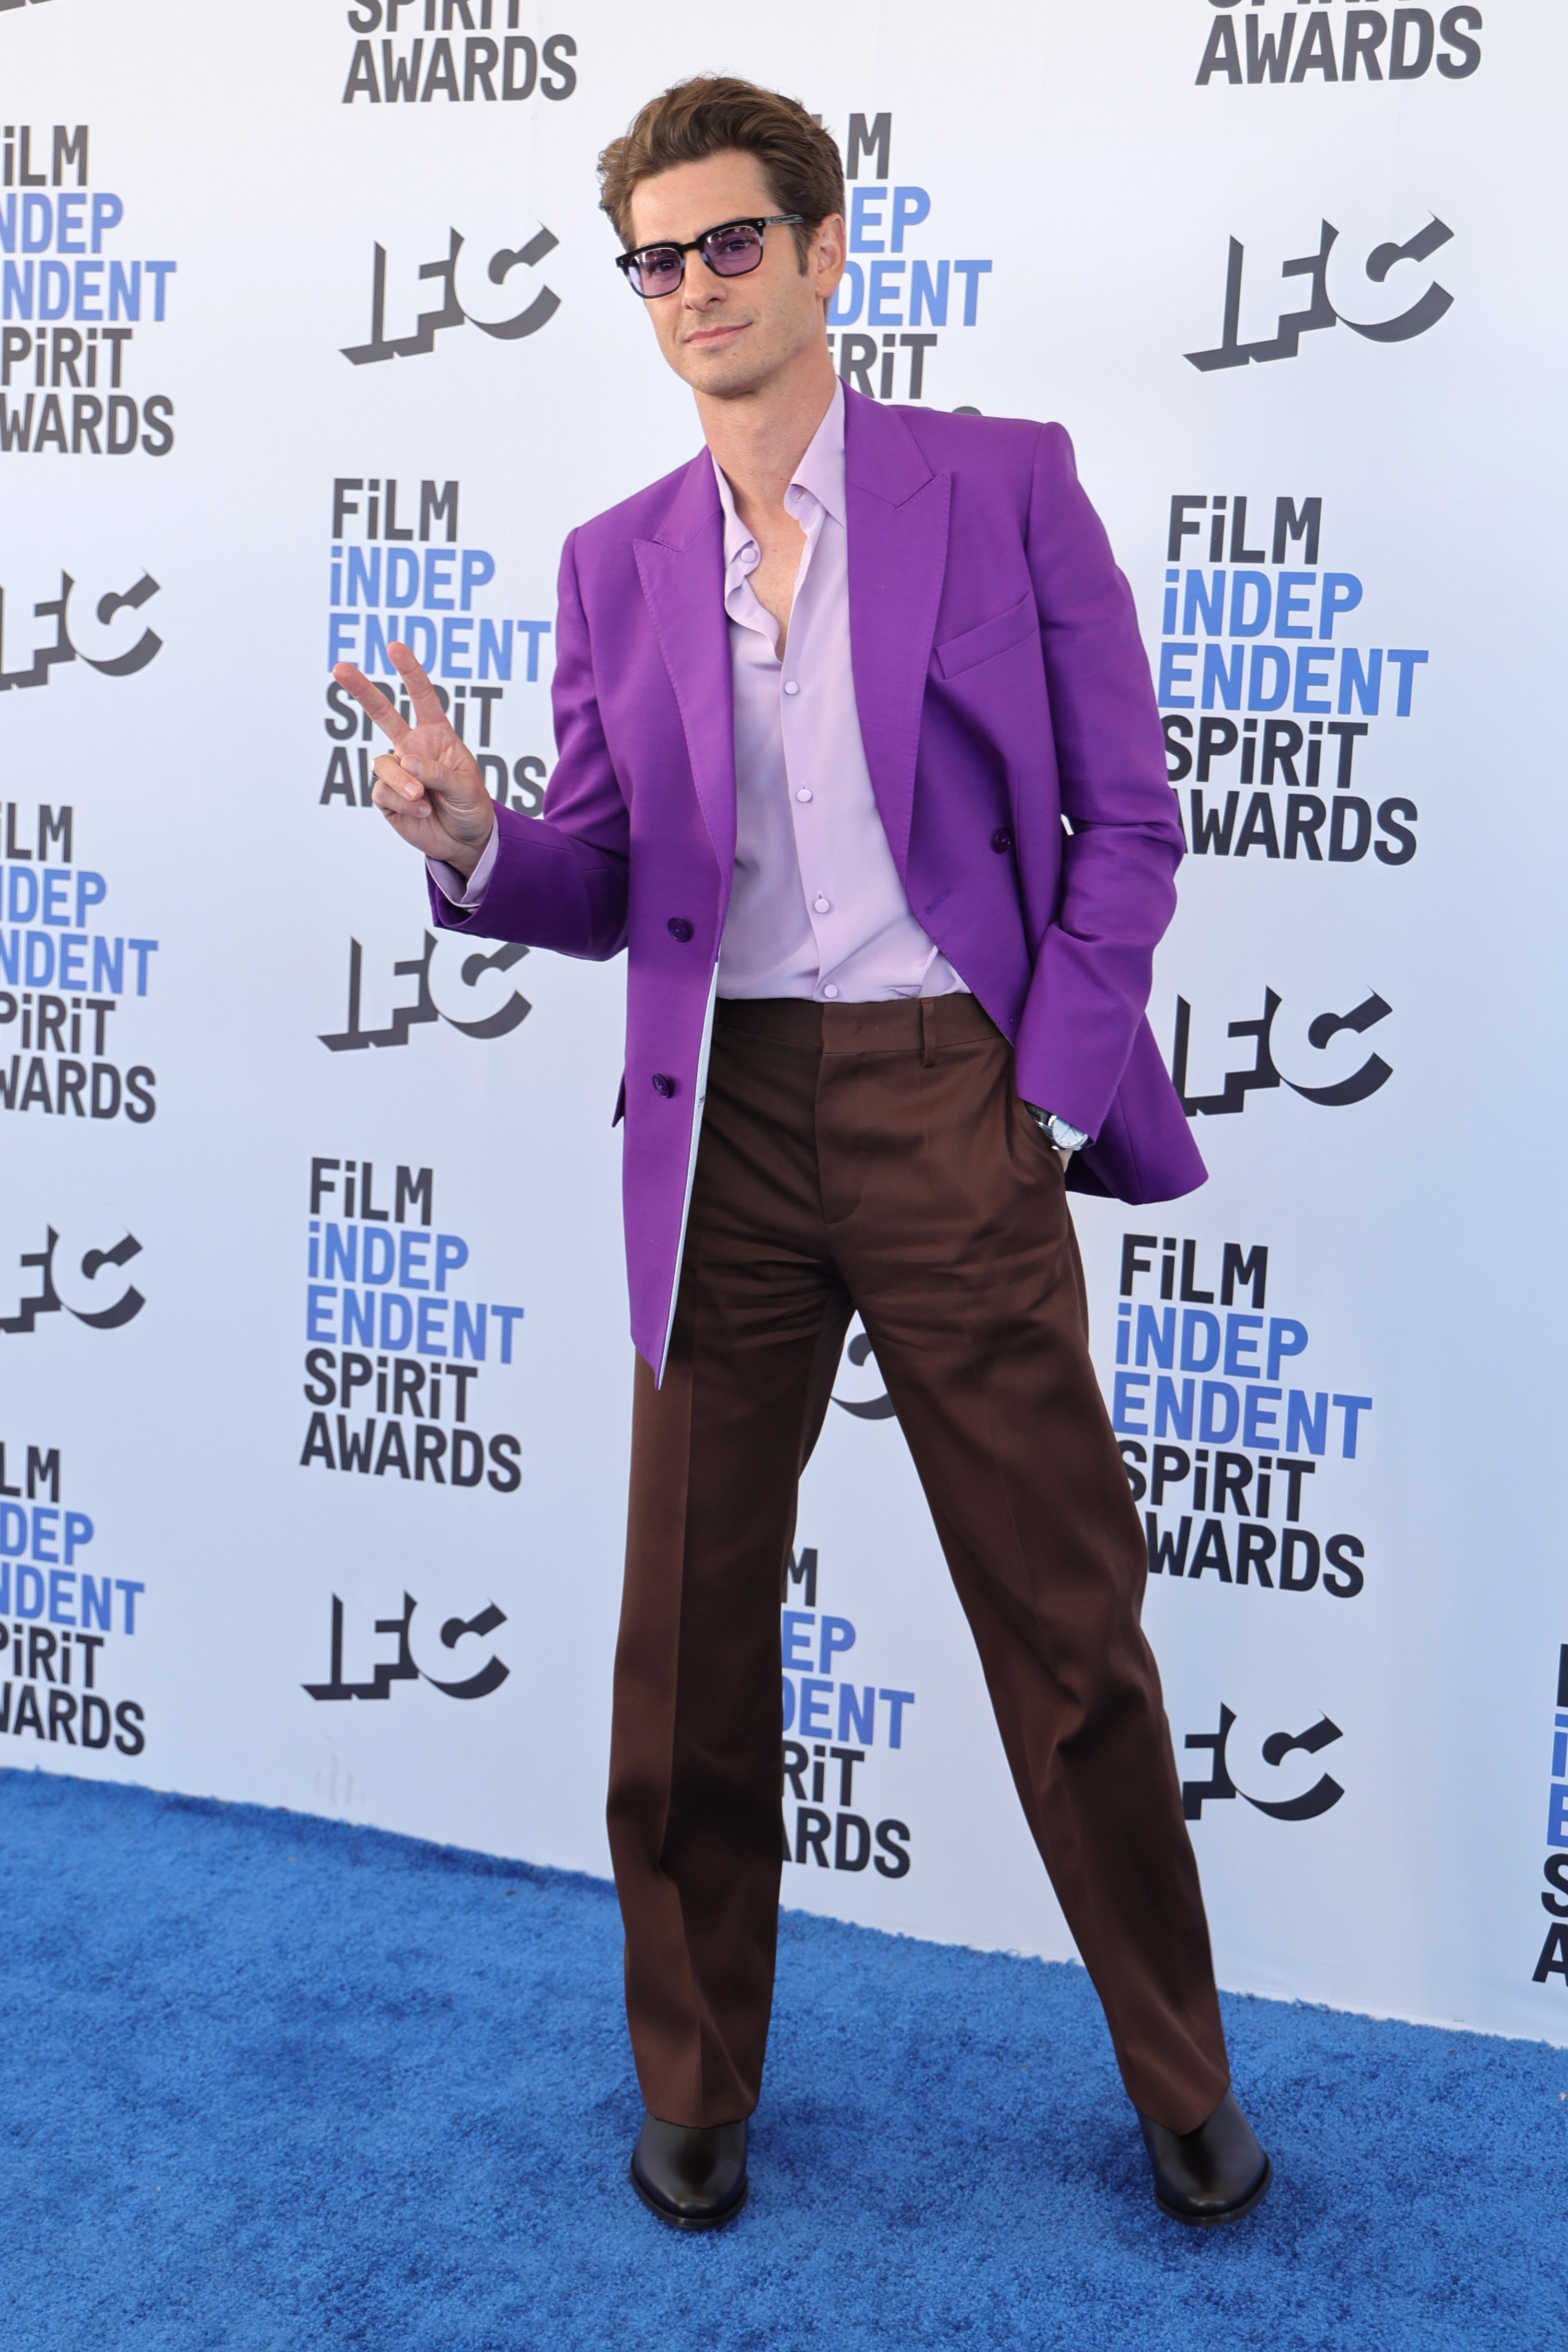 Andrew wears a purple suit jacket and brown pants